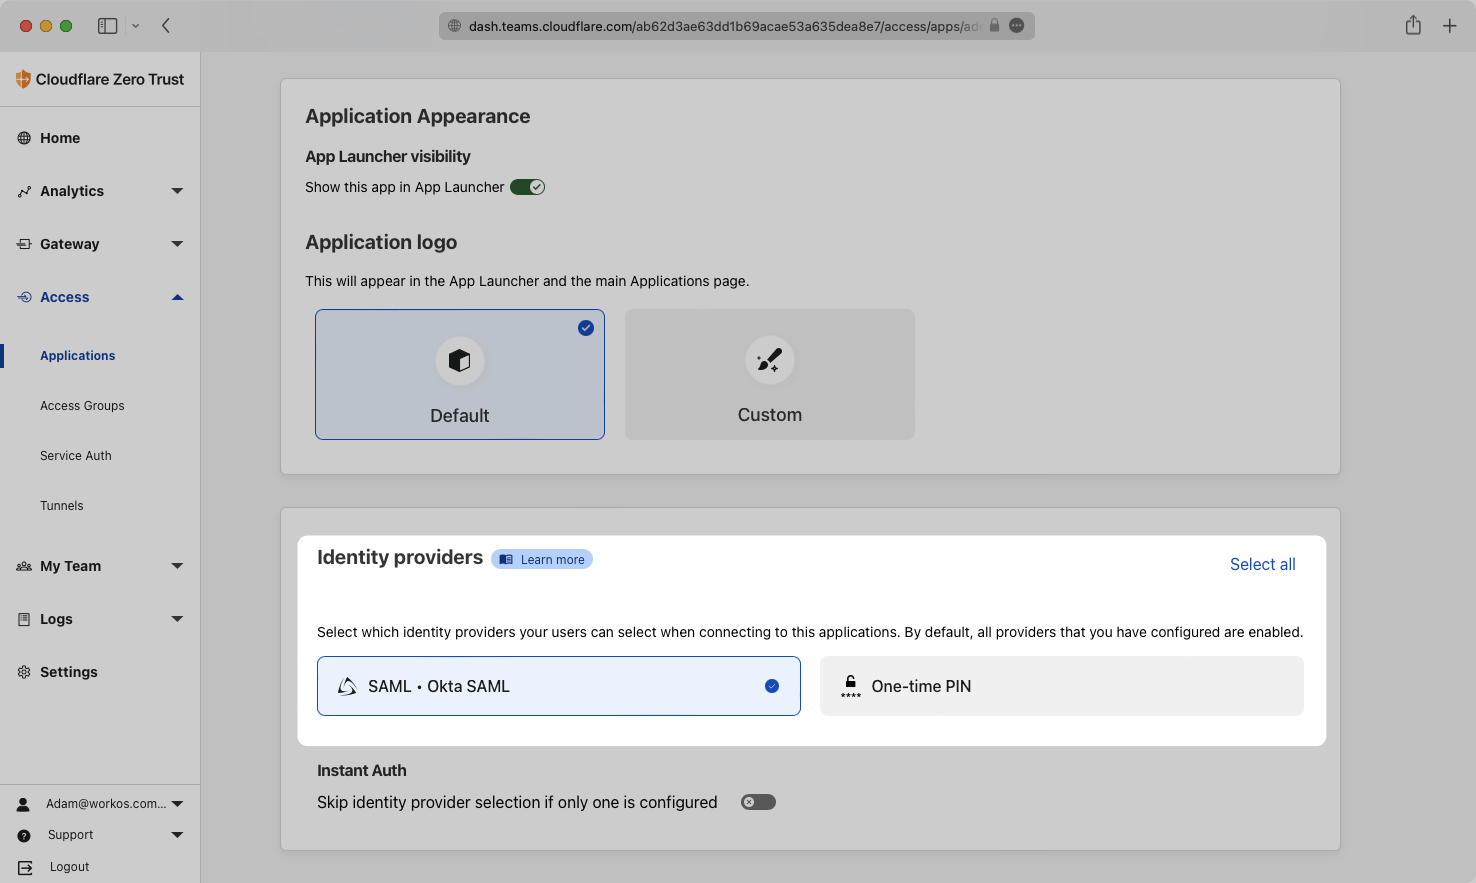 A screenshot highlighting where to select the Identity Provider in the Cloudflare application.